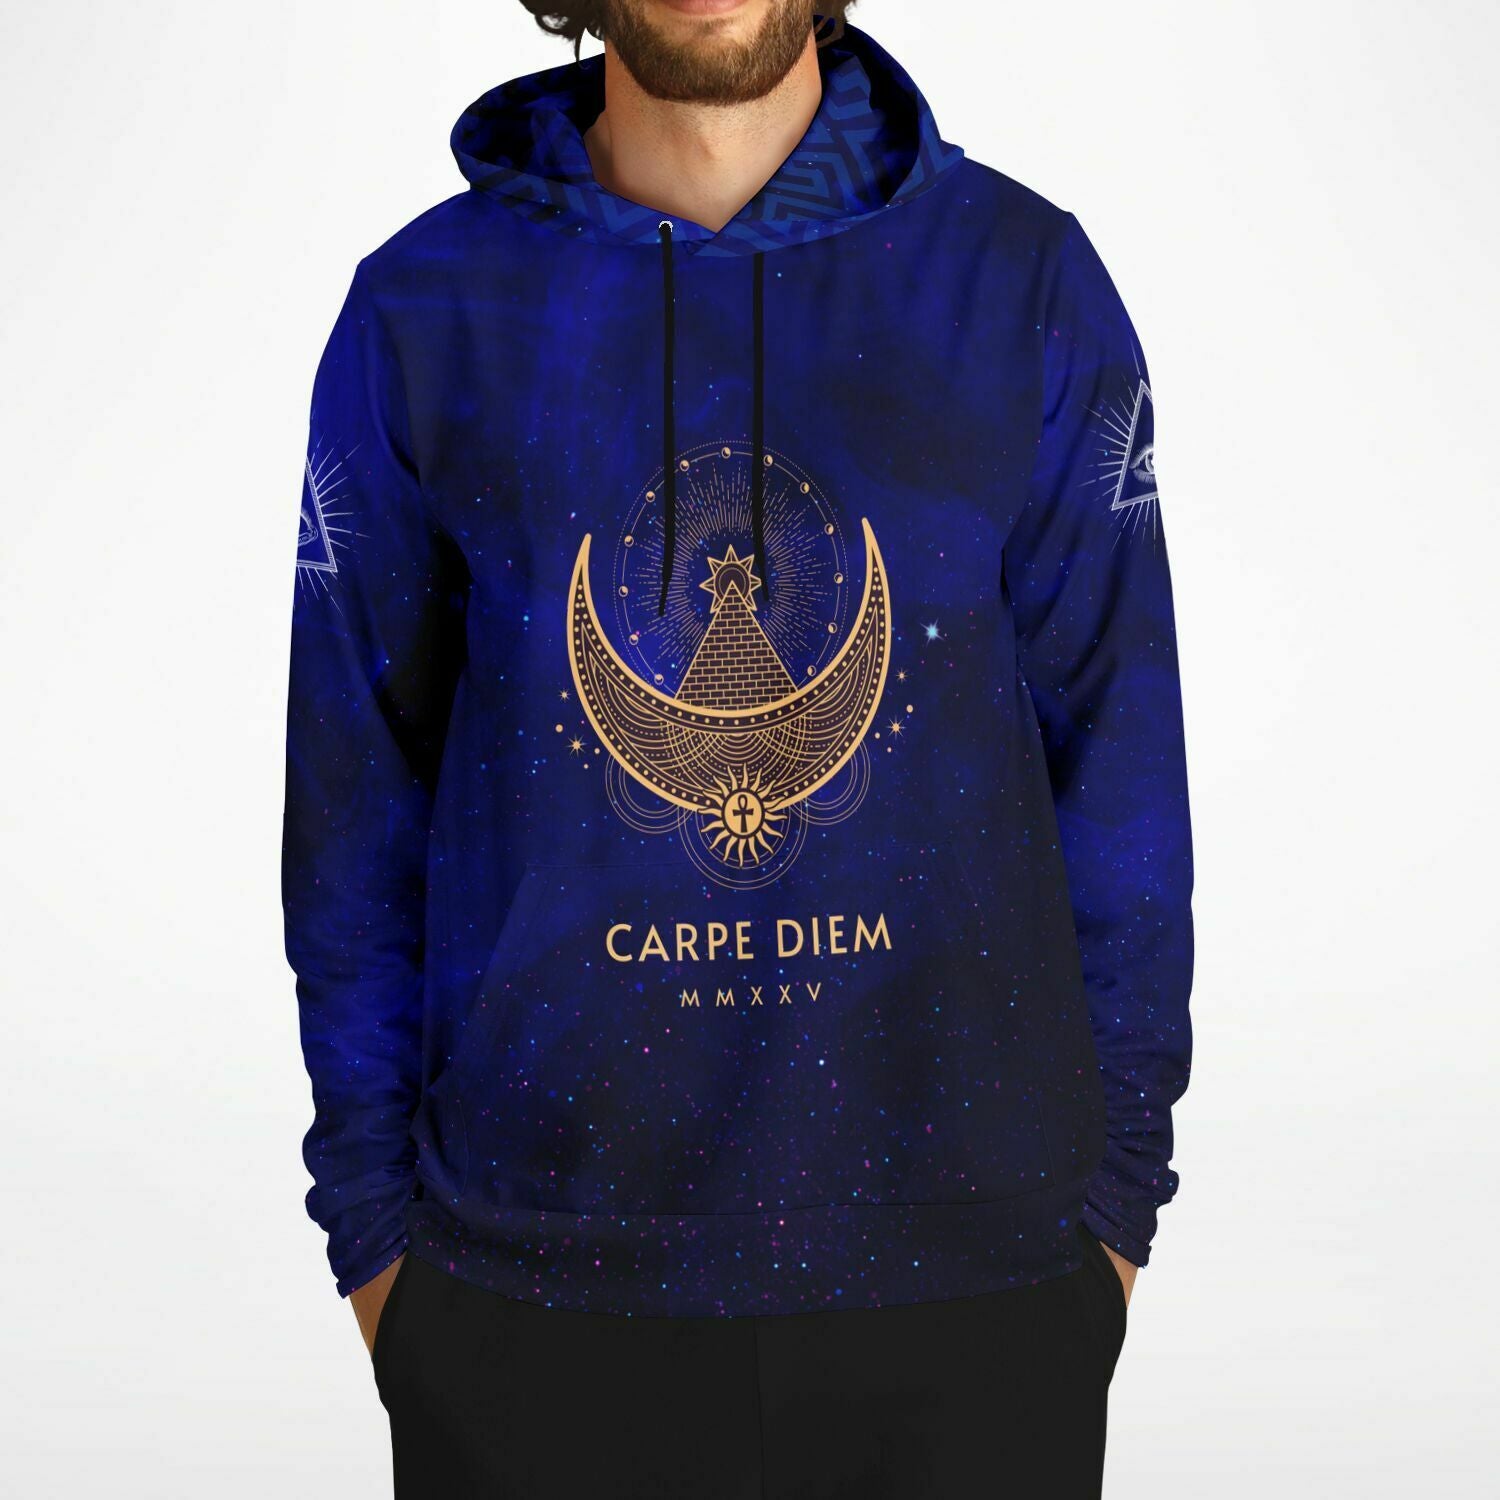 Elivior's fashion hoodie features a crescent moon alongside the Eye of Providence, incorporating Illuminati and Masonic symbols, creating a trendy piece of celebrity streetwear.